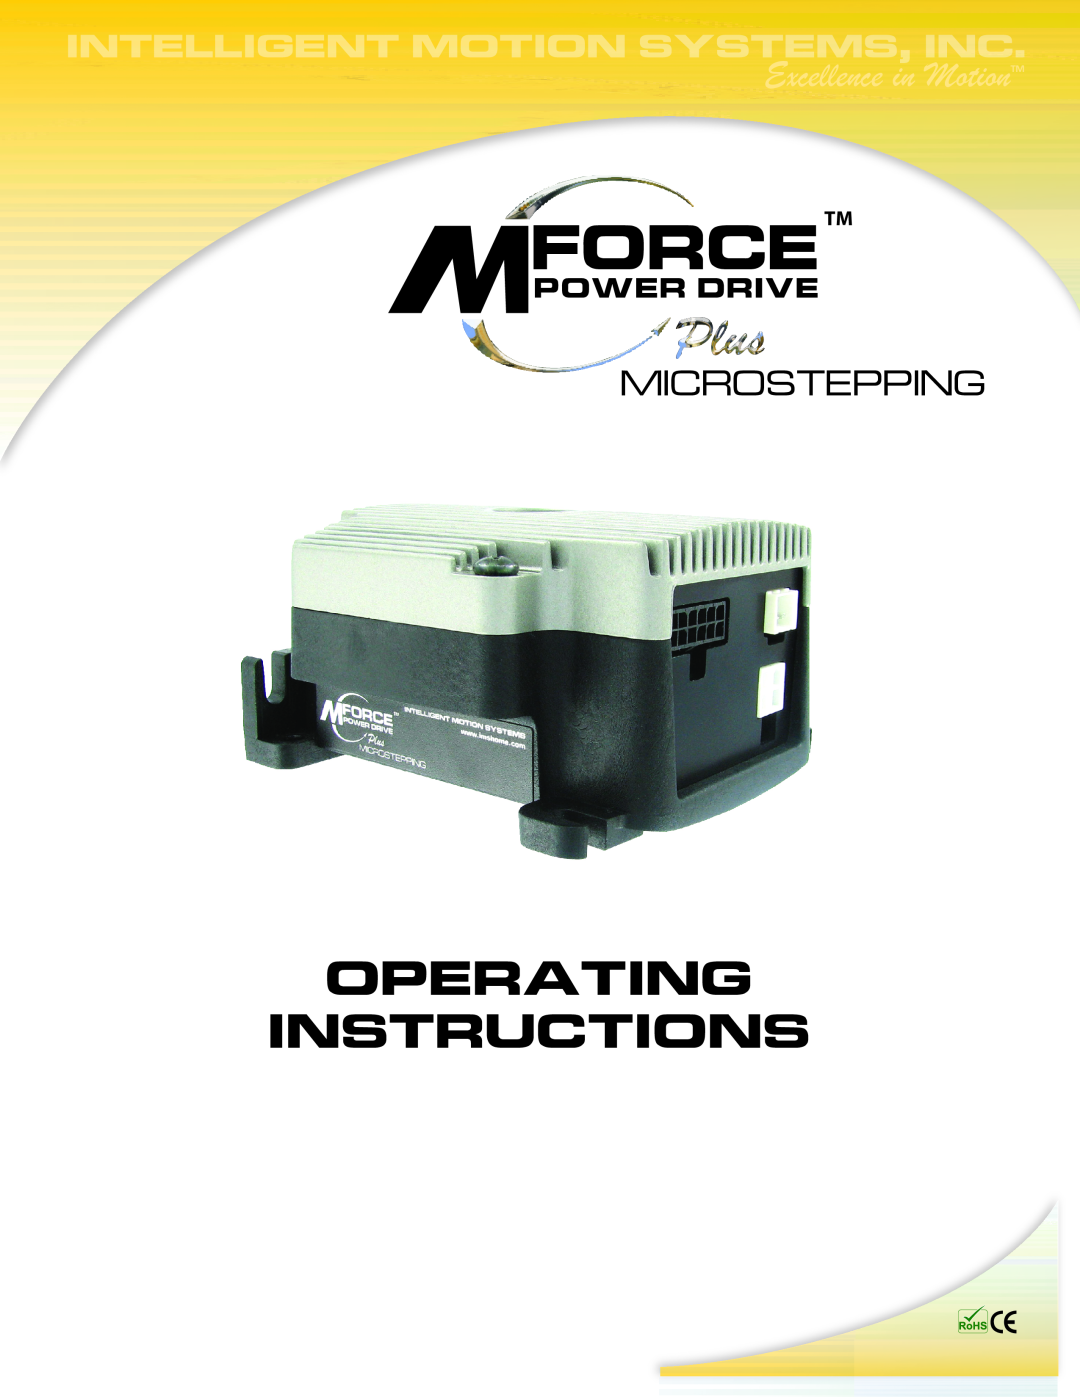 Intelligent Motion Systems Motion Detector operating instructions Microstepping, Power Drive, Forcetm 